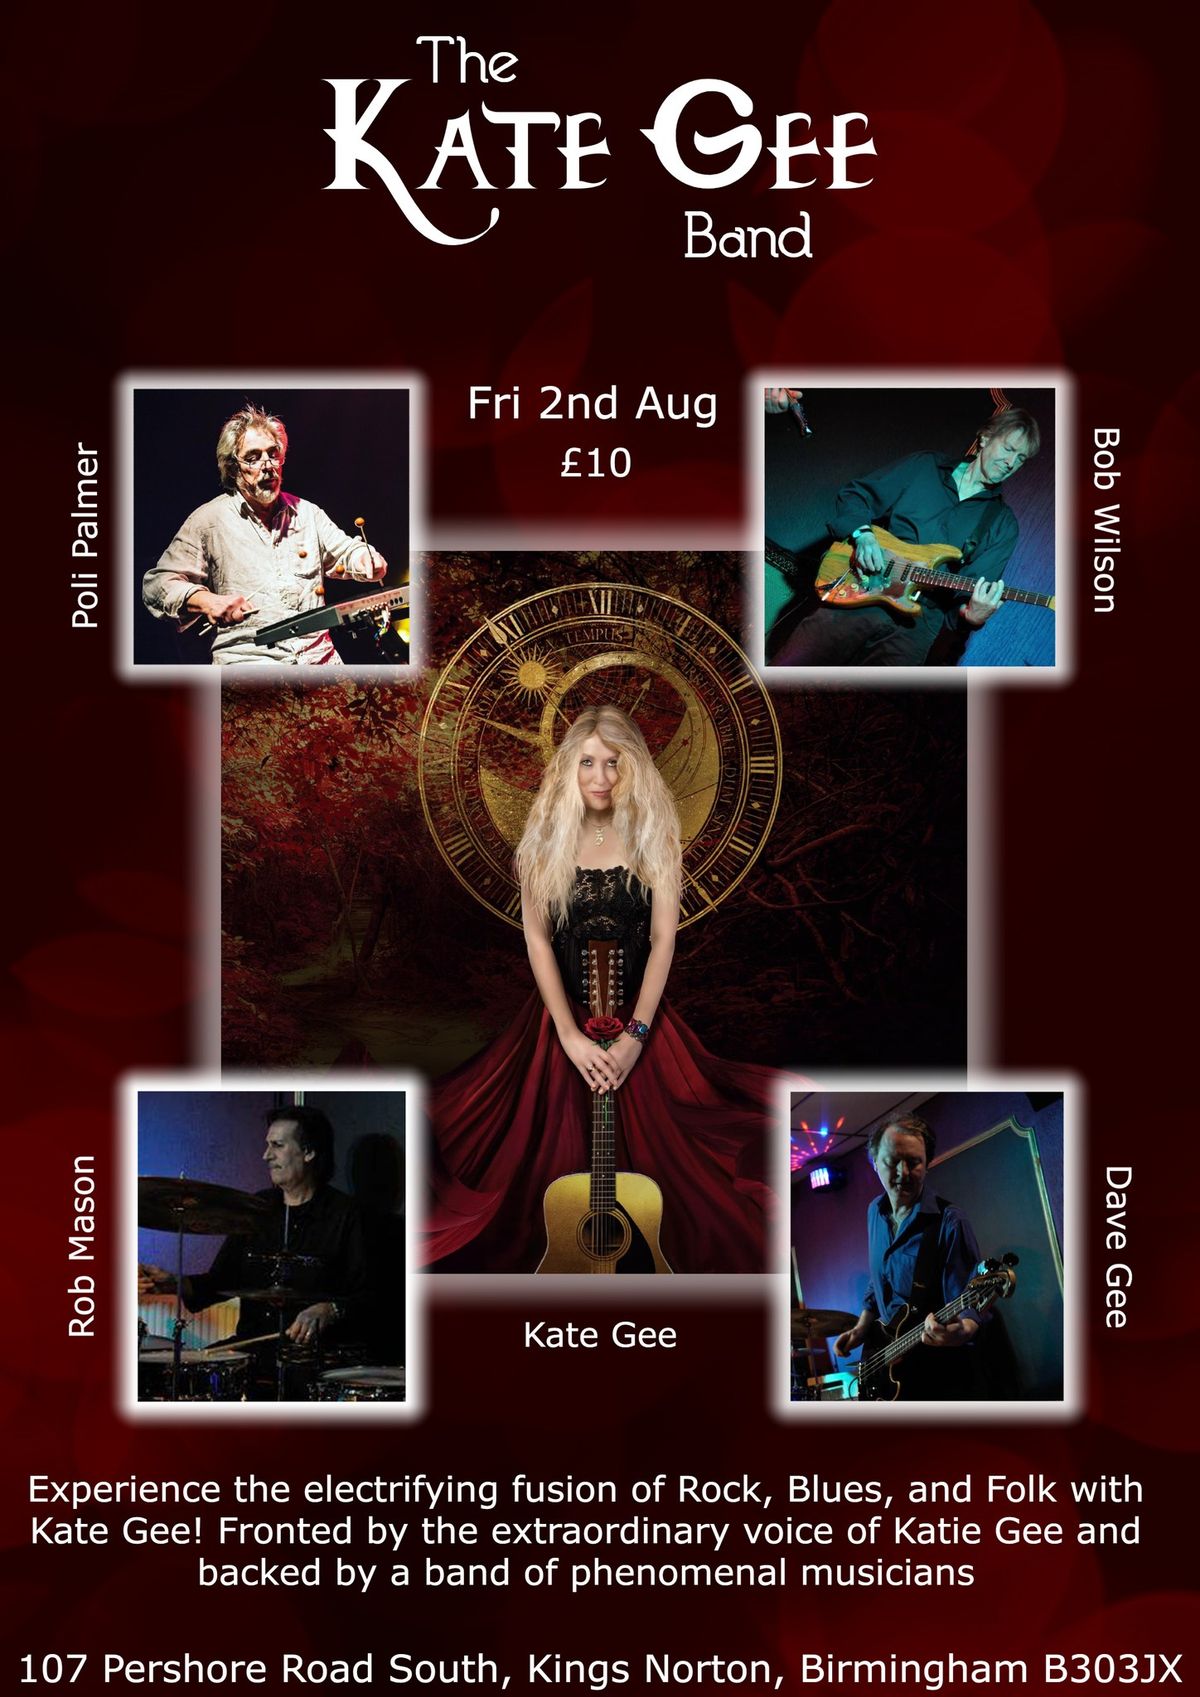 The Kate Gee Band